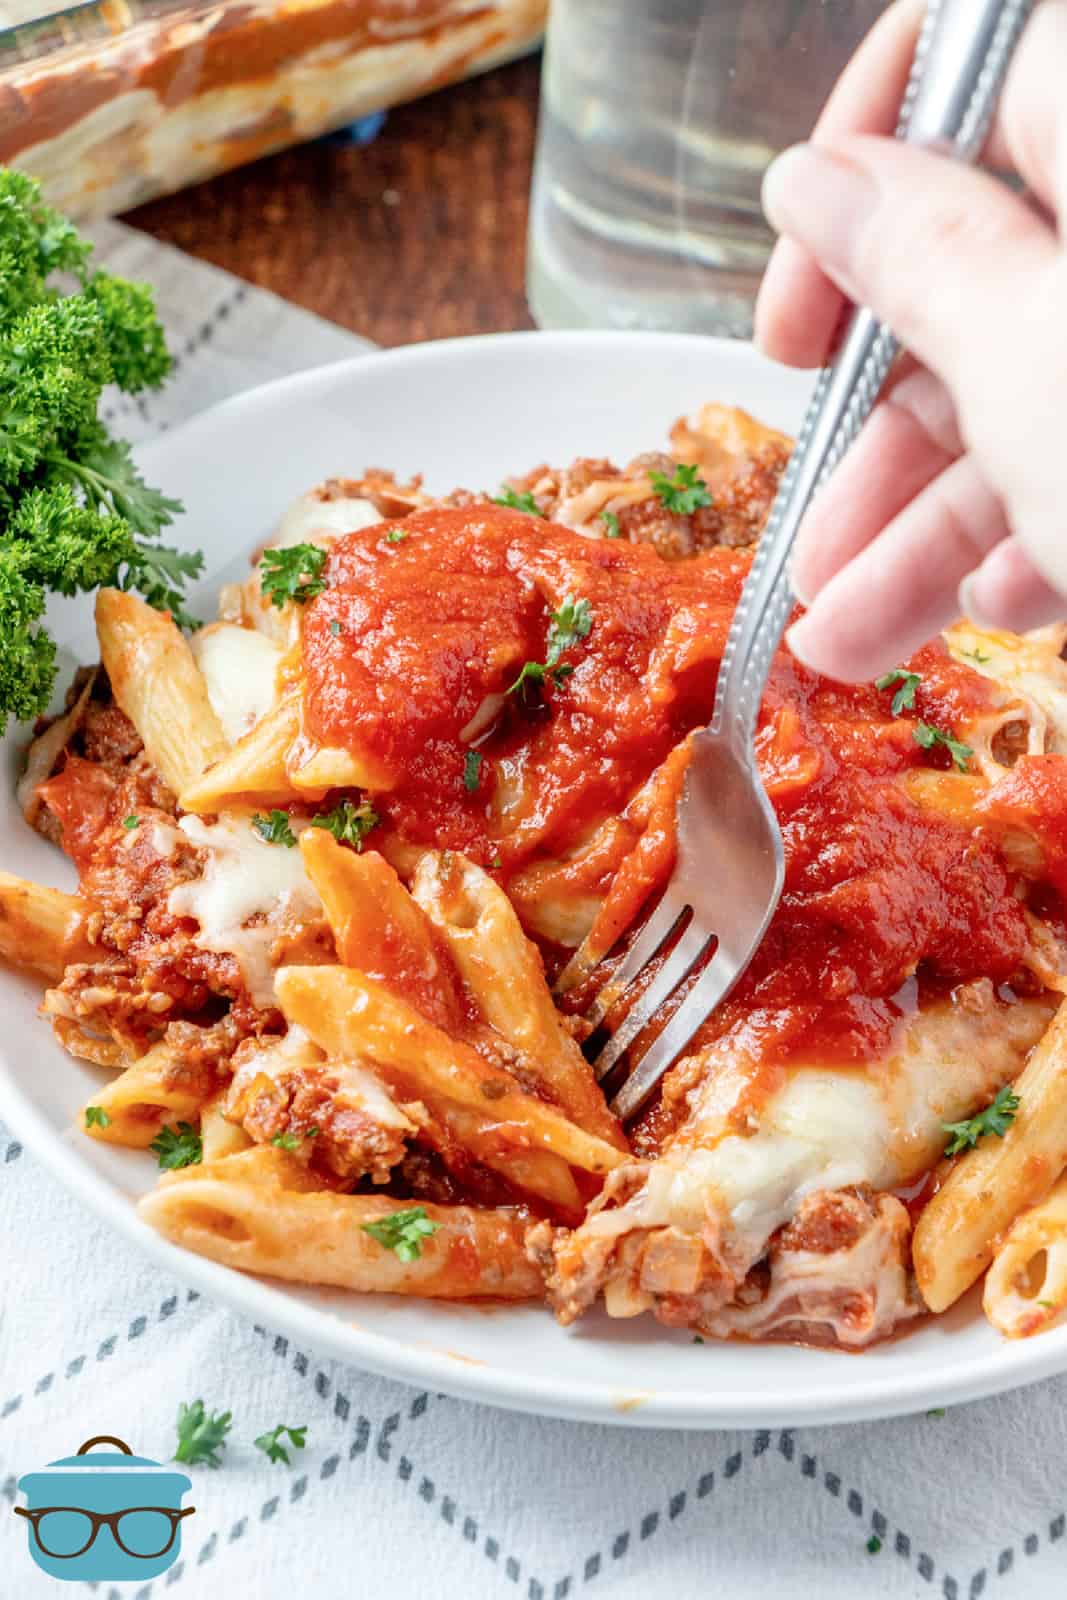 silver fork inserted into penne pasta and spaghetti sauce